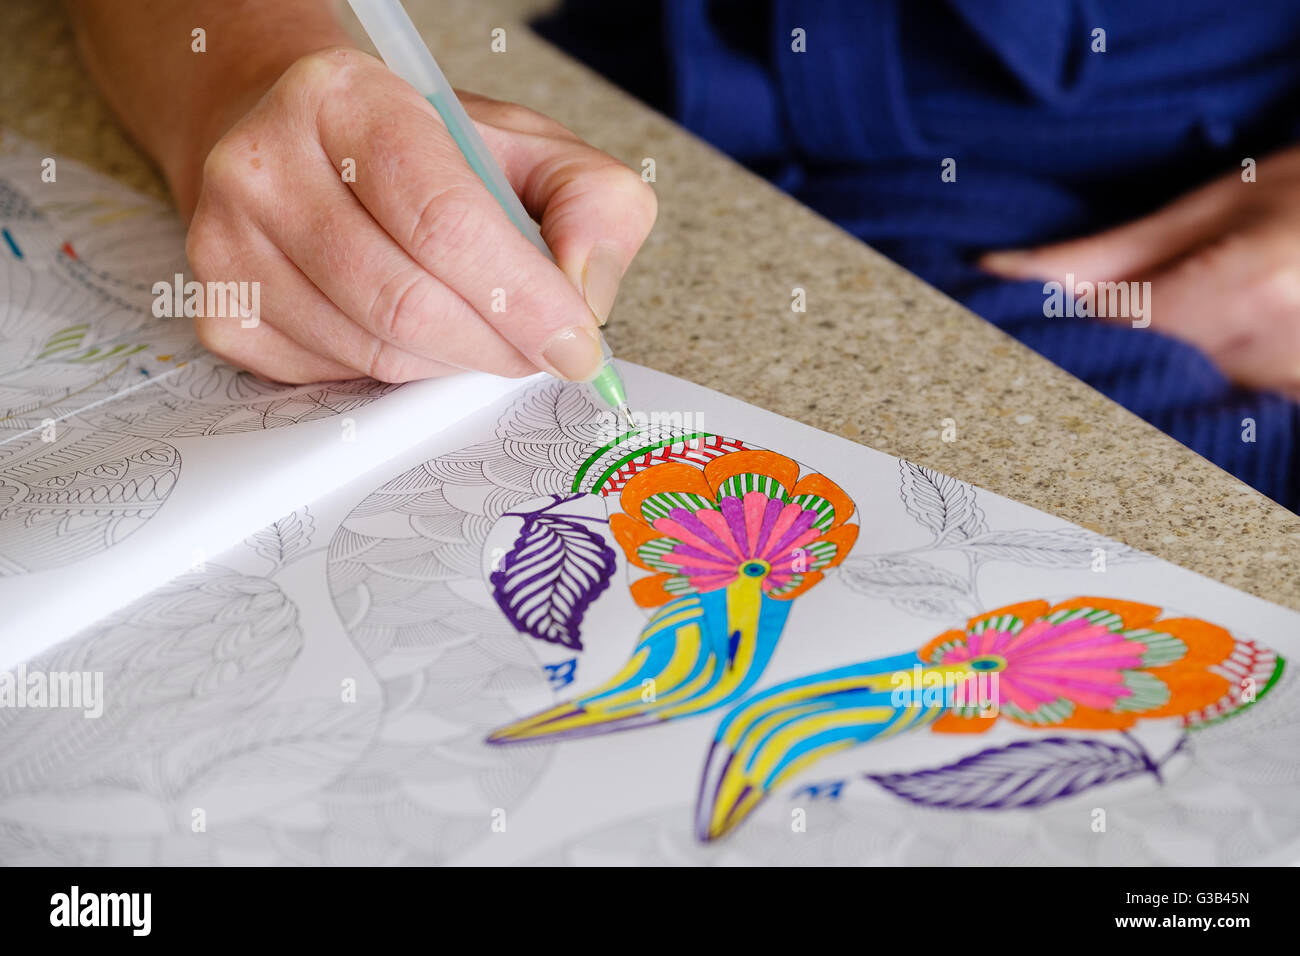 An adult passing time using a brightly coloured adult colouring book Stock Photo